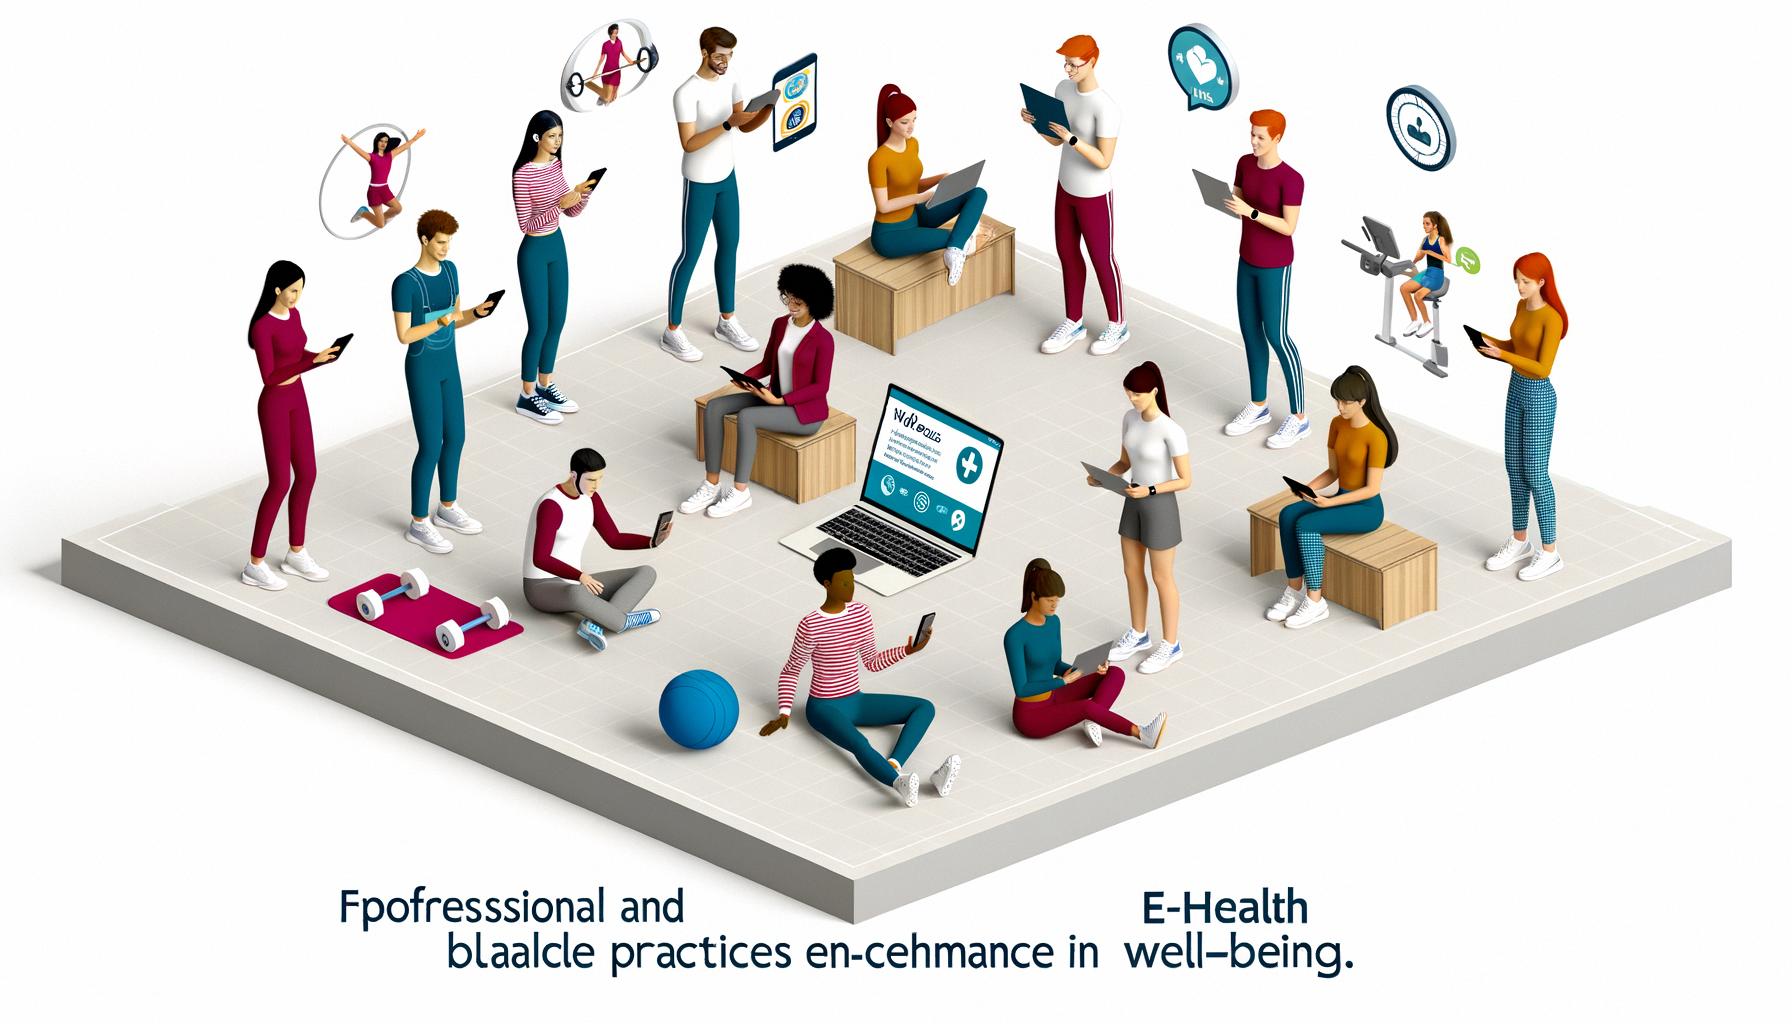 eHealth practices enhance college well-being